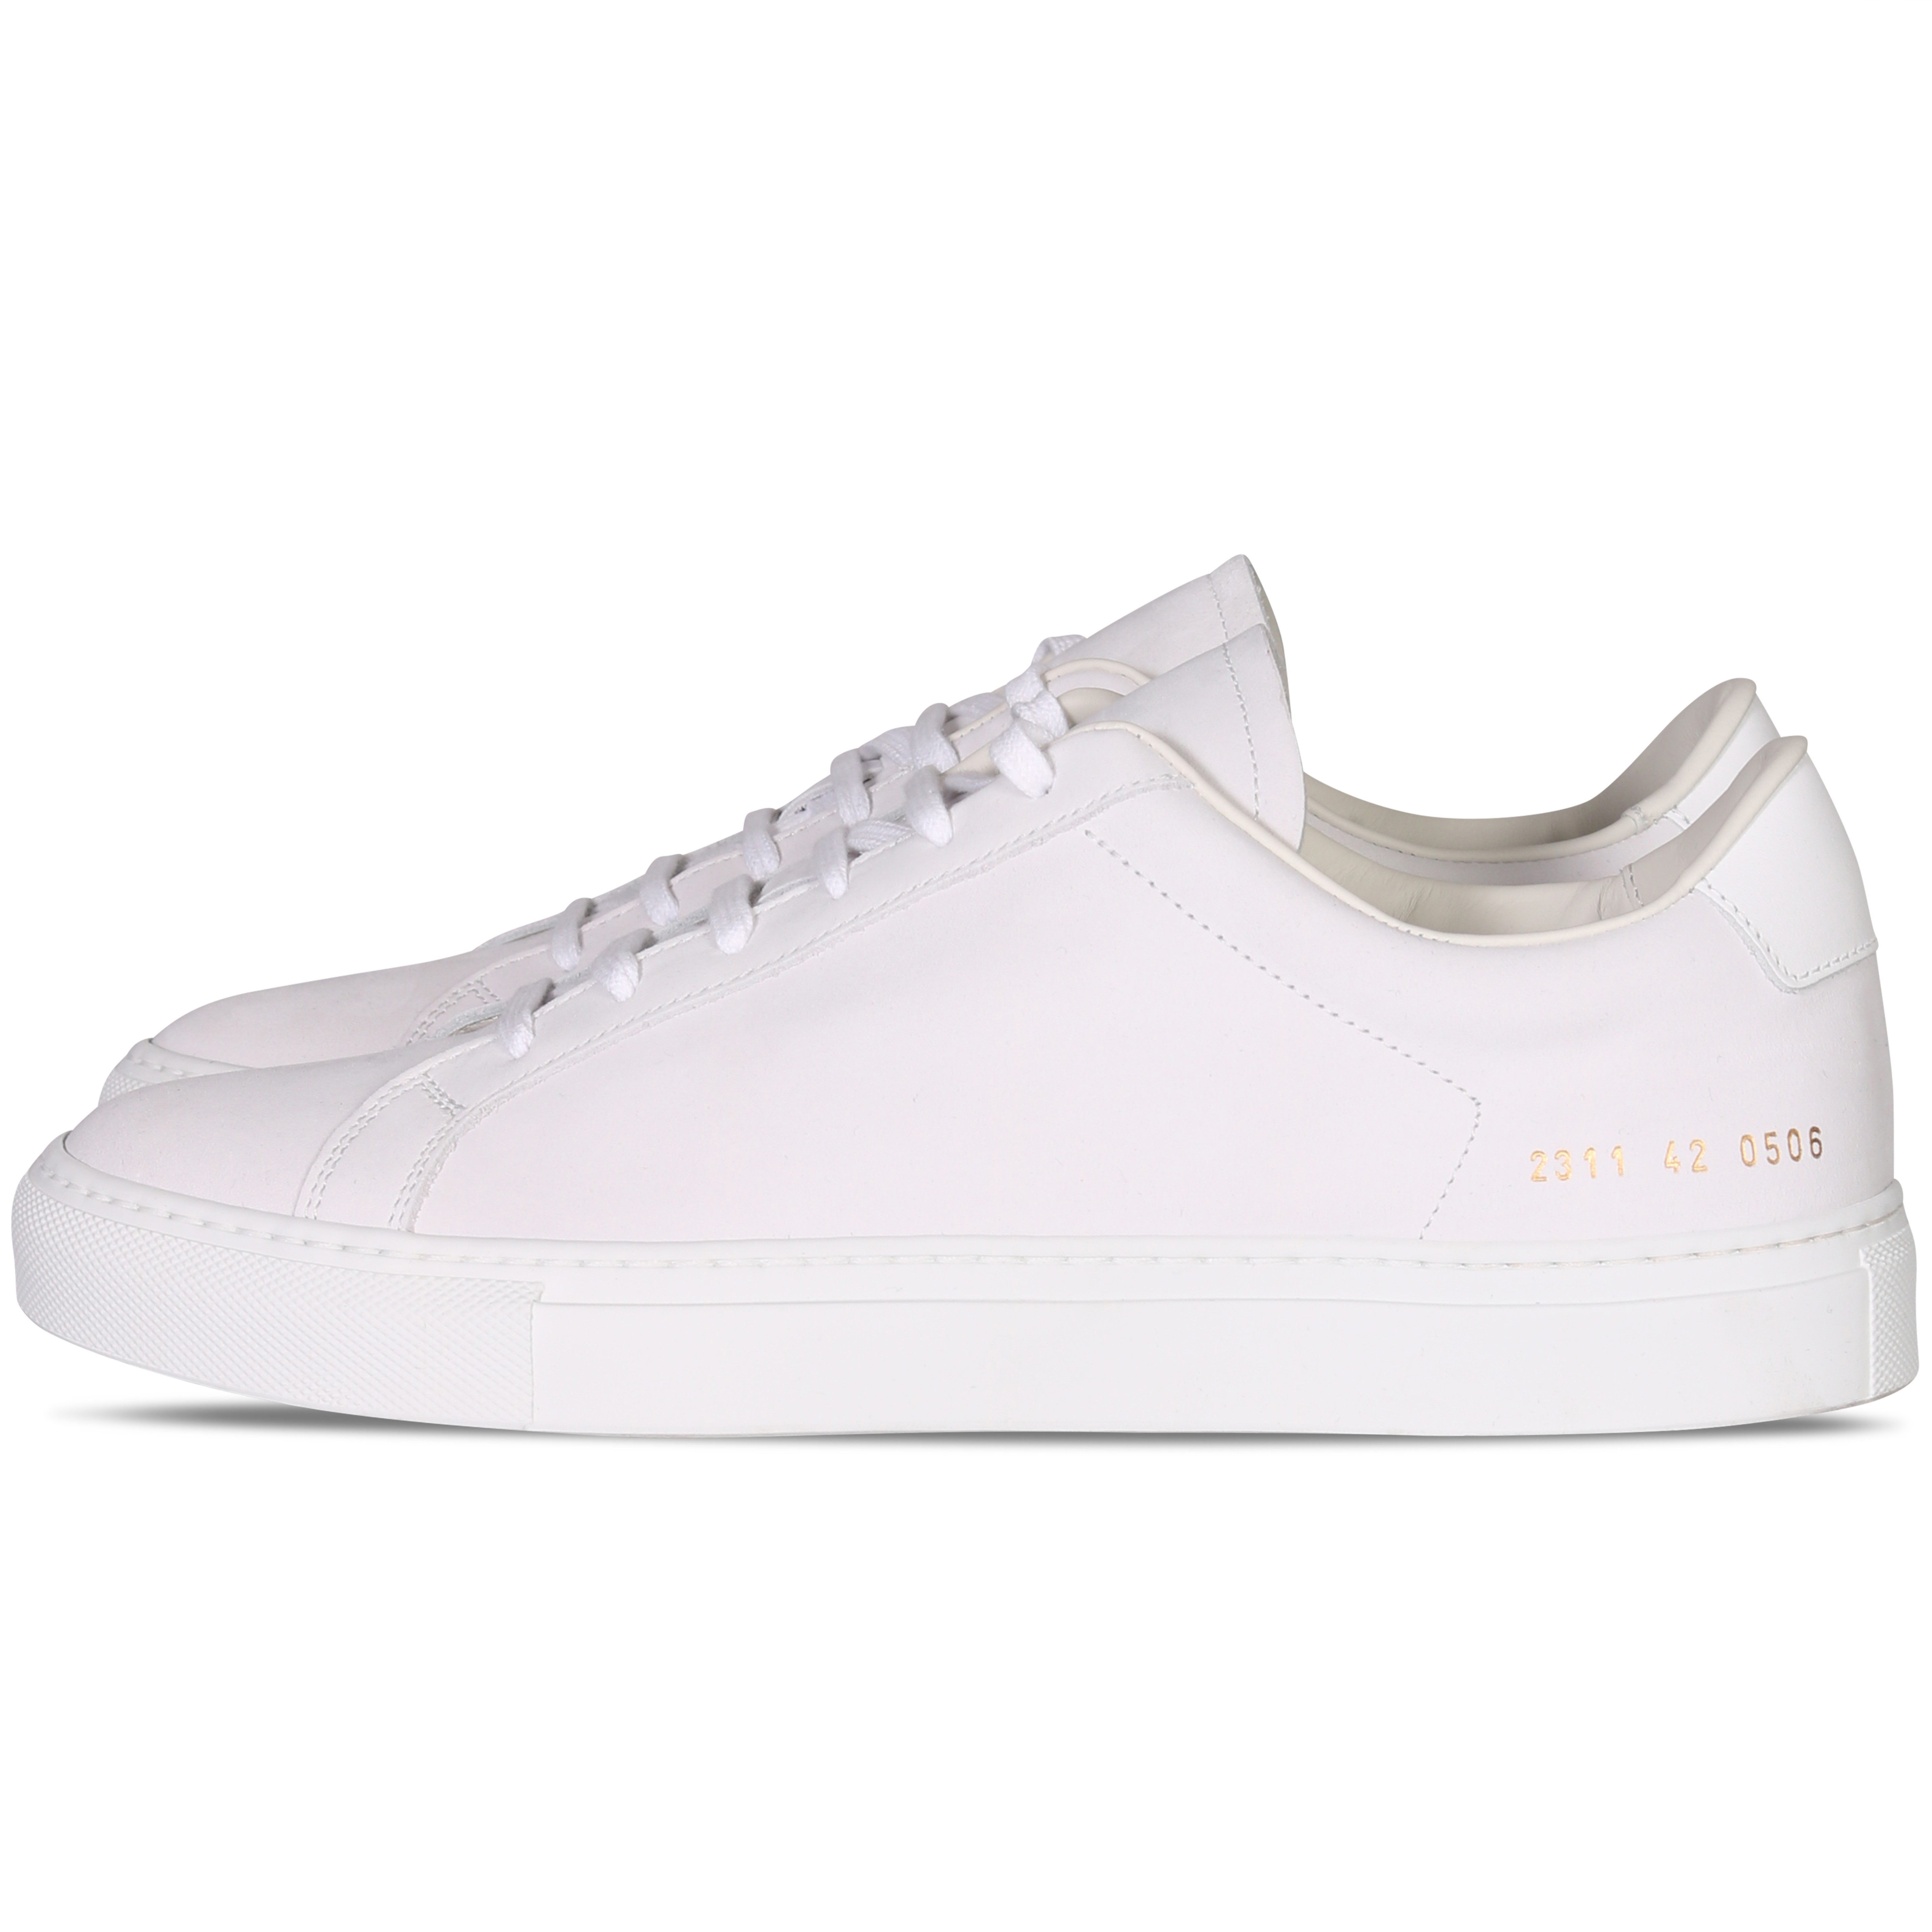 Common Projects Sneaker Retro Low White/White 46